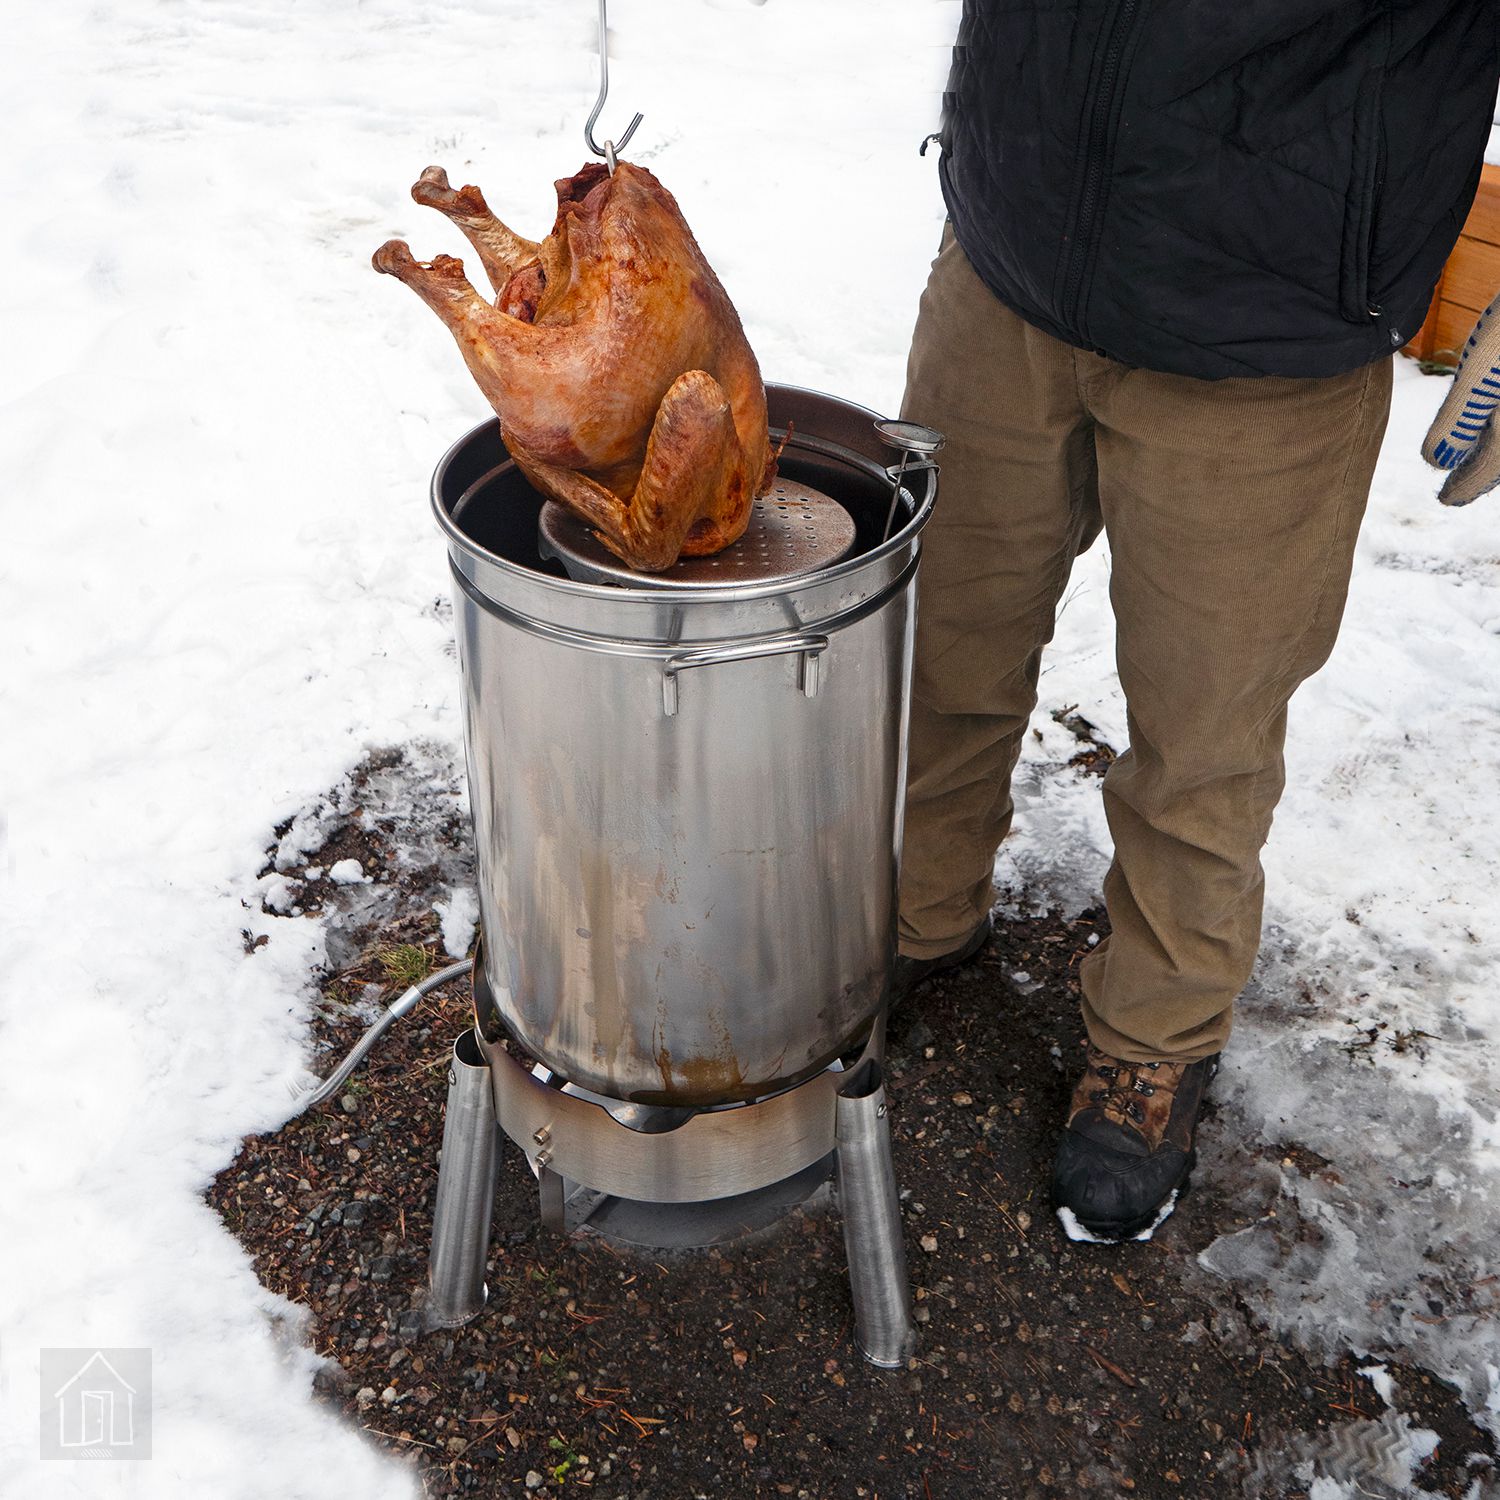 Do not overfill your a turkey fryer